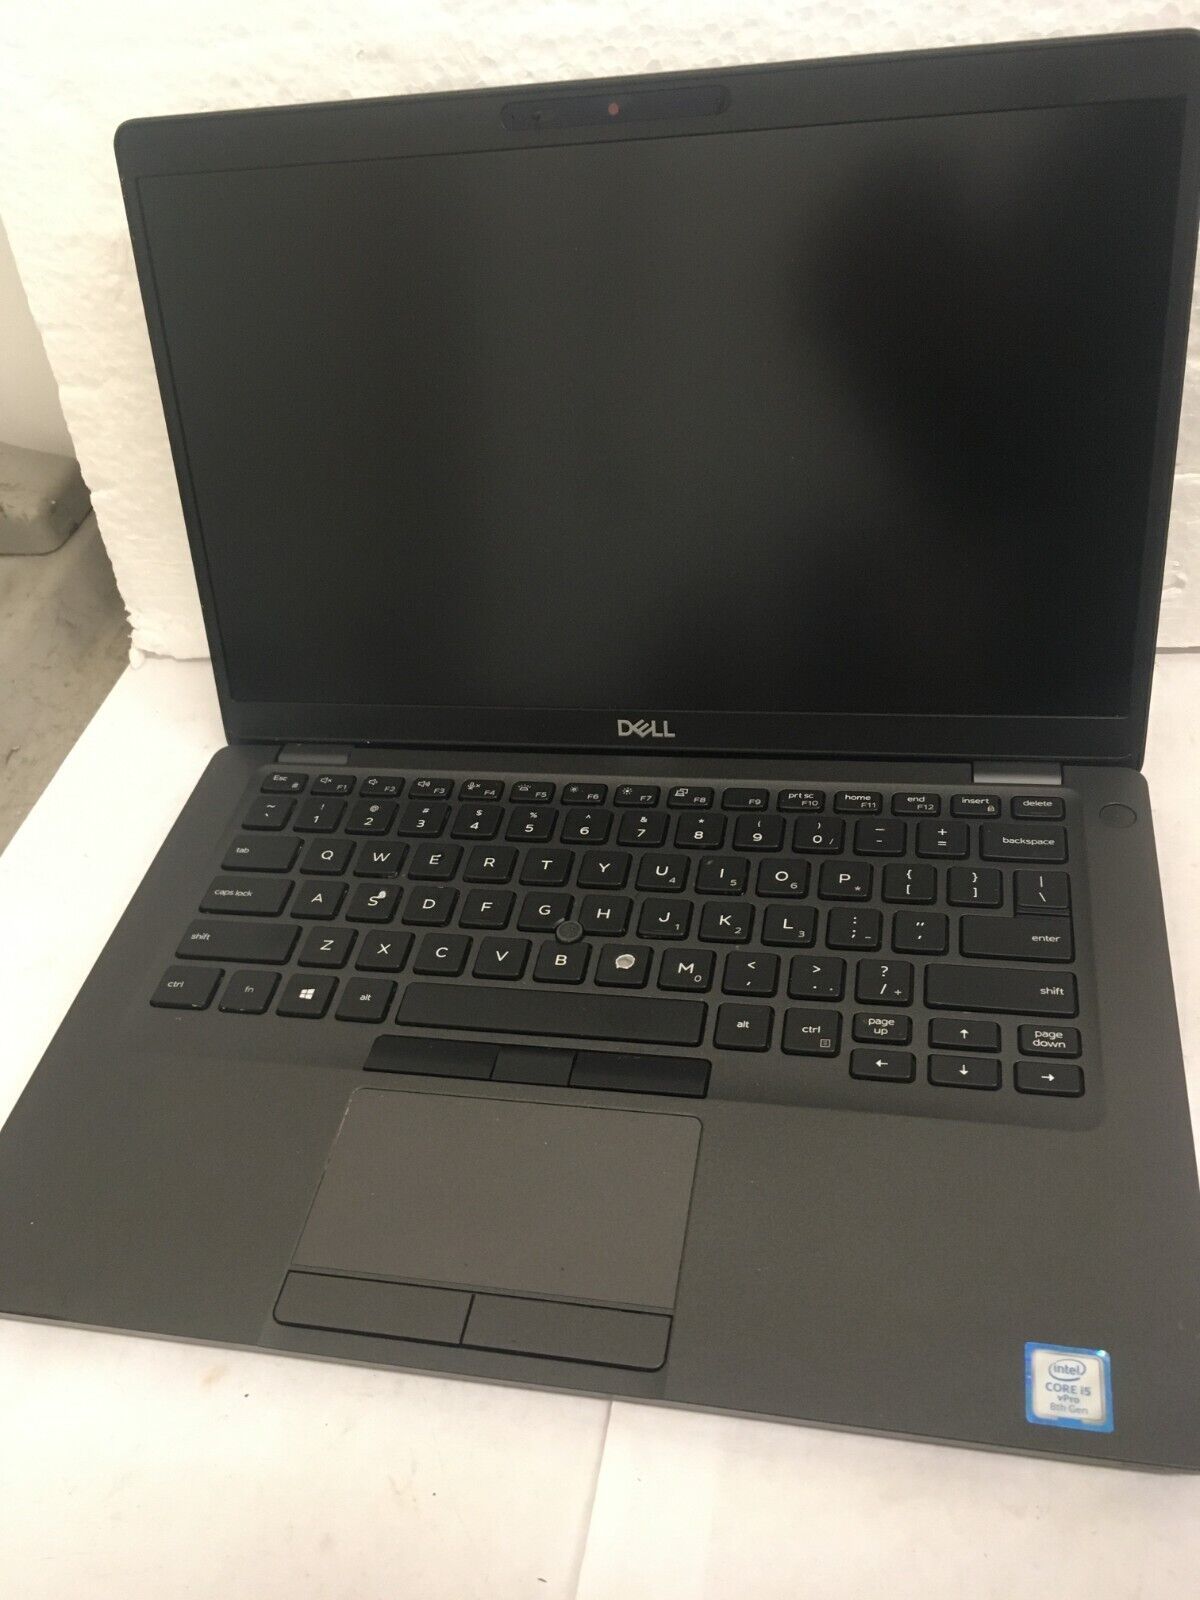 Dell Latitude 5400 i5-8365U 4GB great condition with power adapter - $115.93